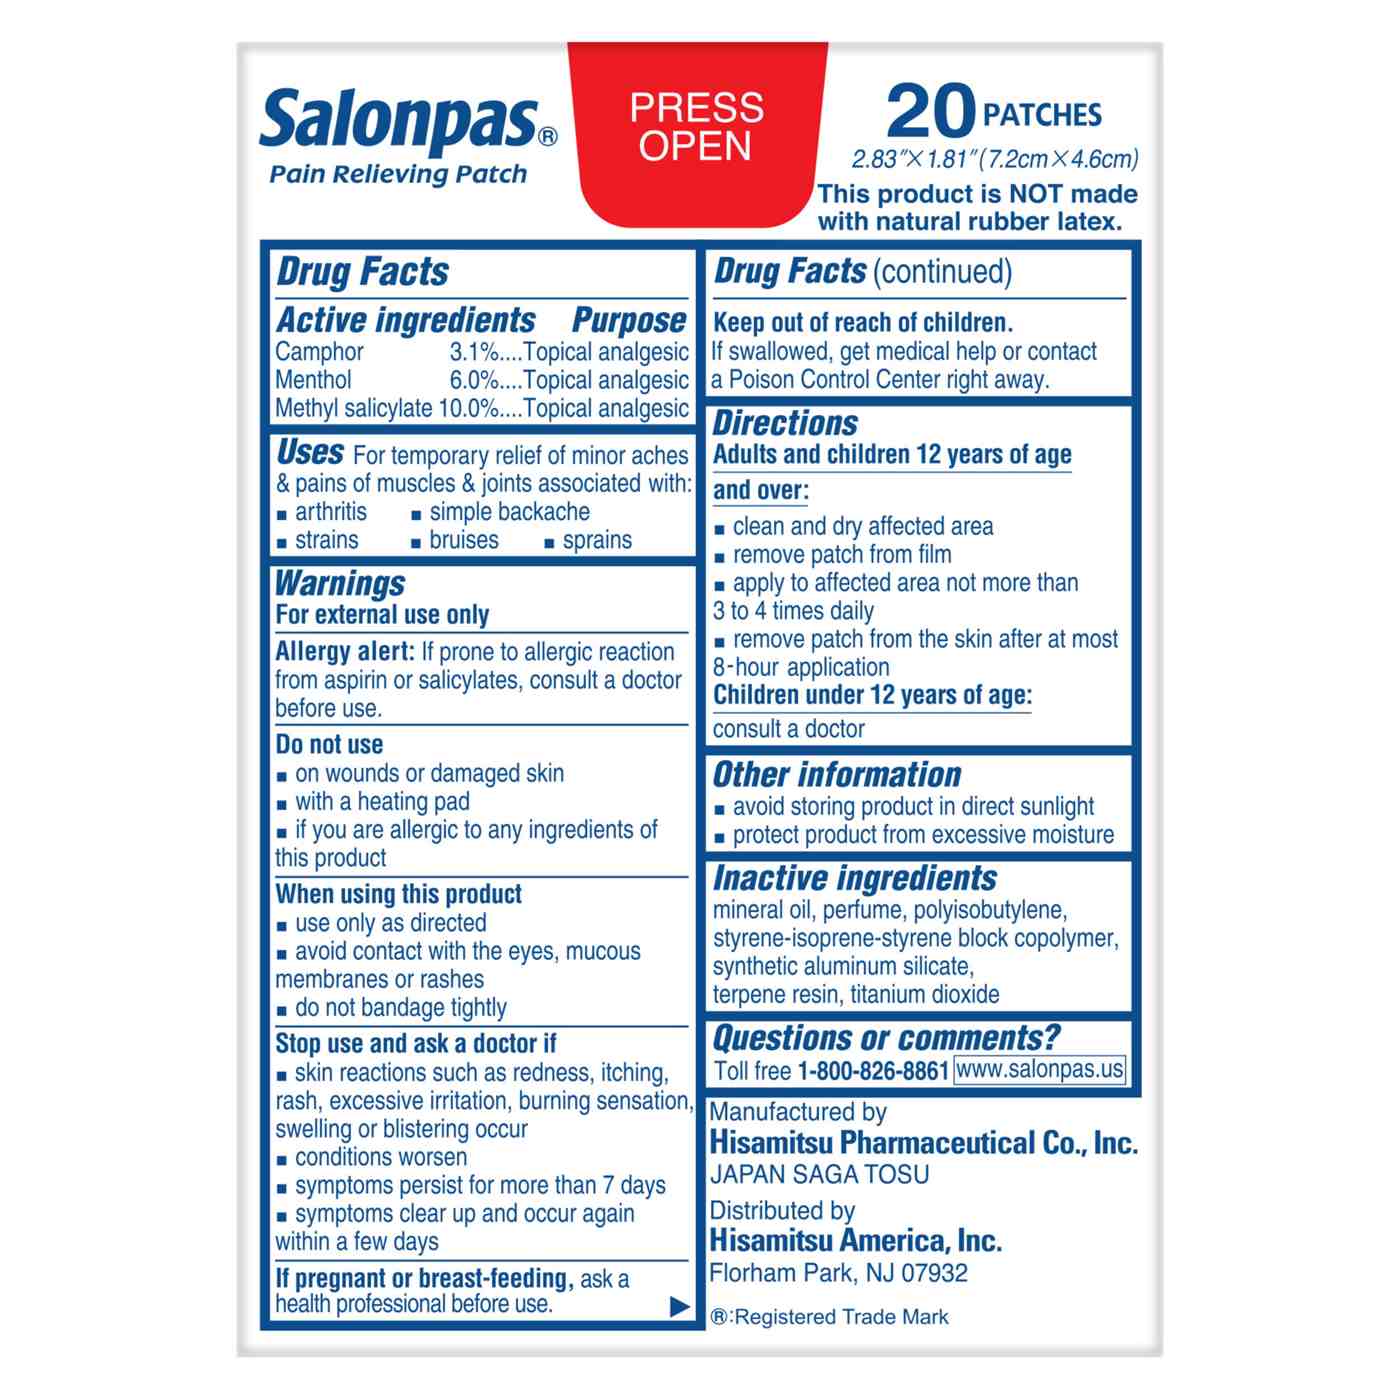 Salonpas Pain Relieving Patch; image 5 of 5